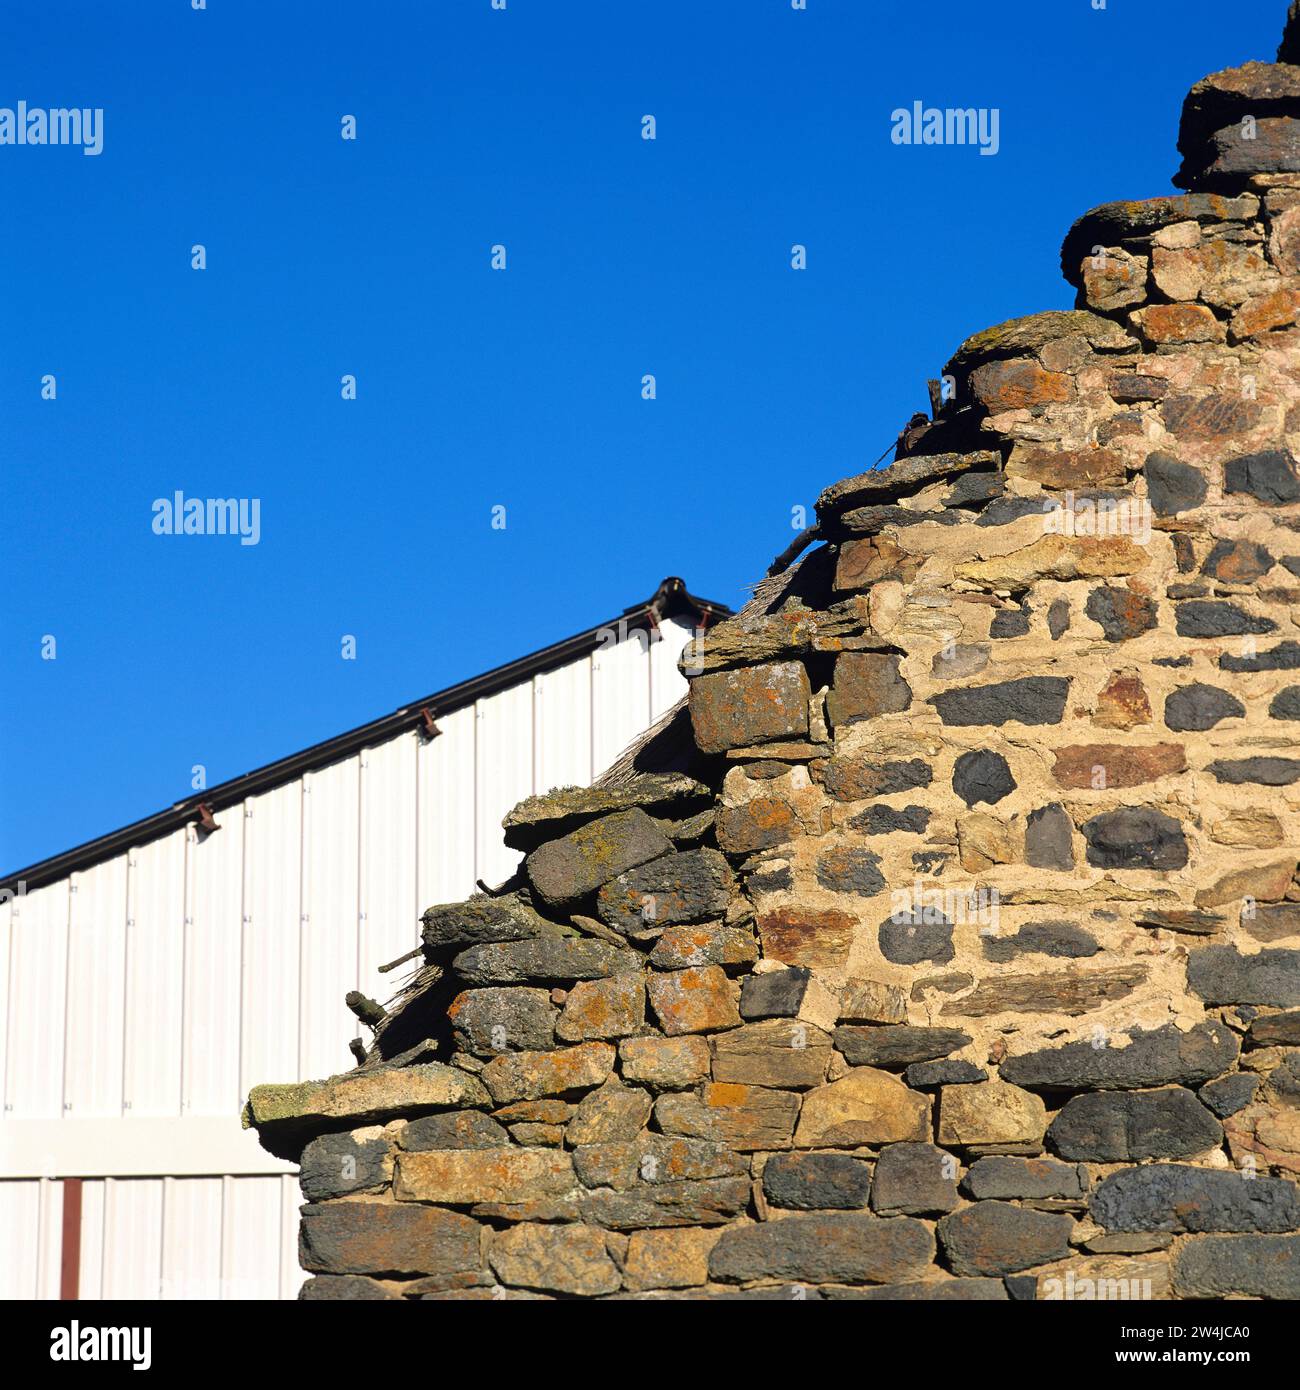 Contrast between two styles of barns (modern and old), Puy de Dome department, Auvergne-Rhone-Alpes, France Stock Photo